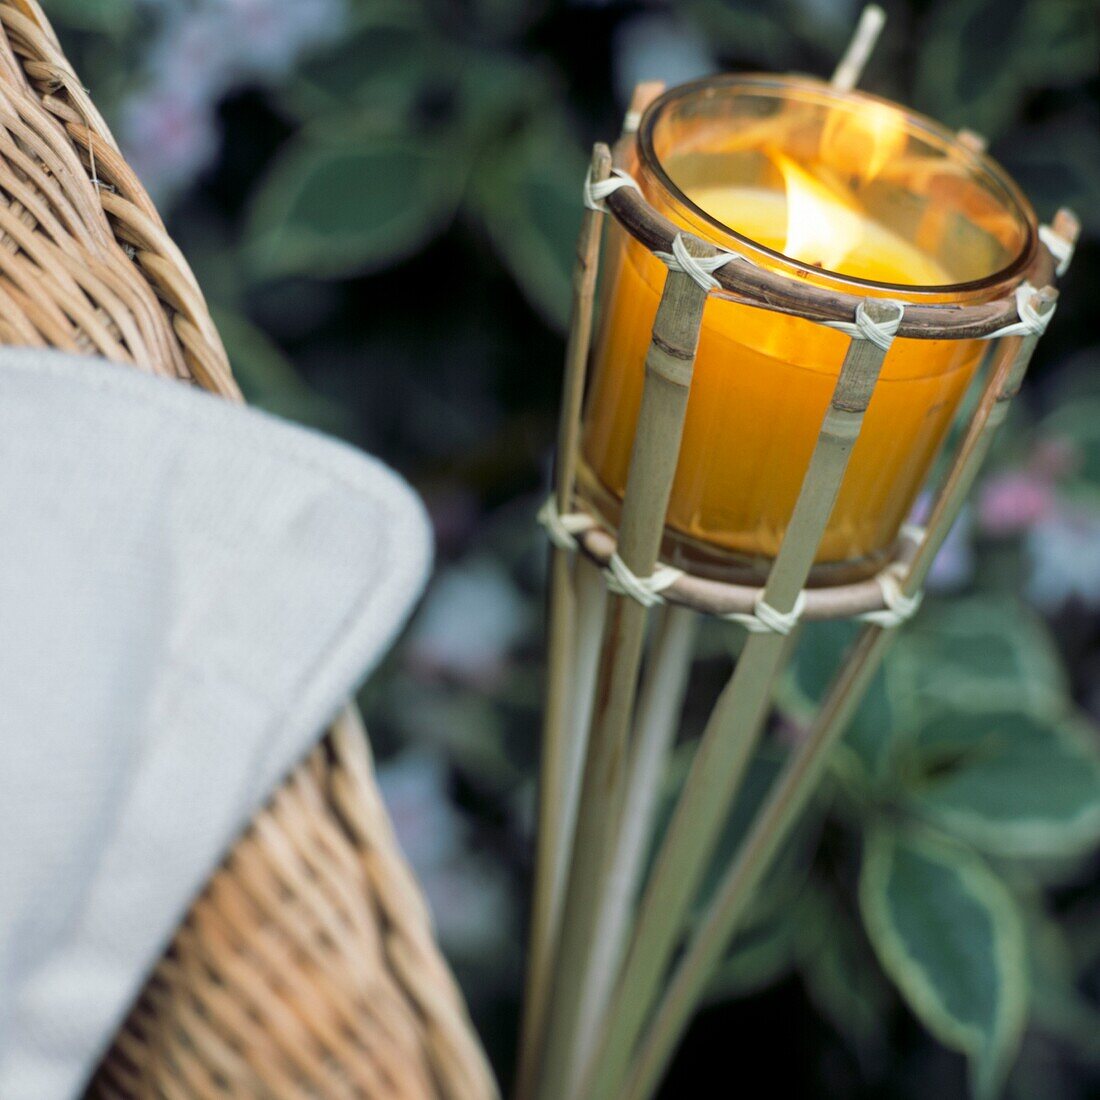 Bamboo torch with lighted candle in garden setting